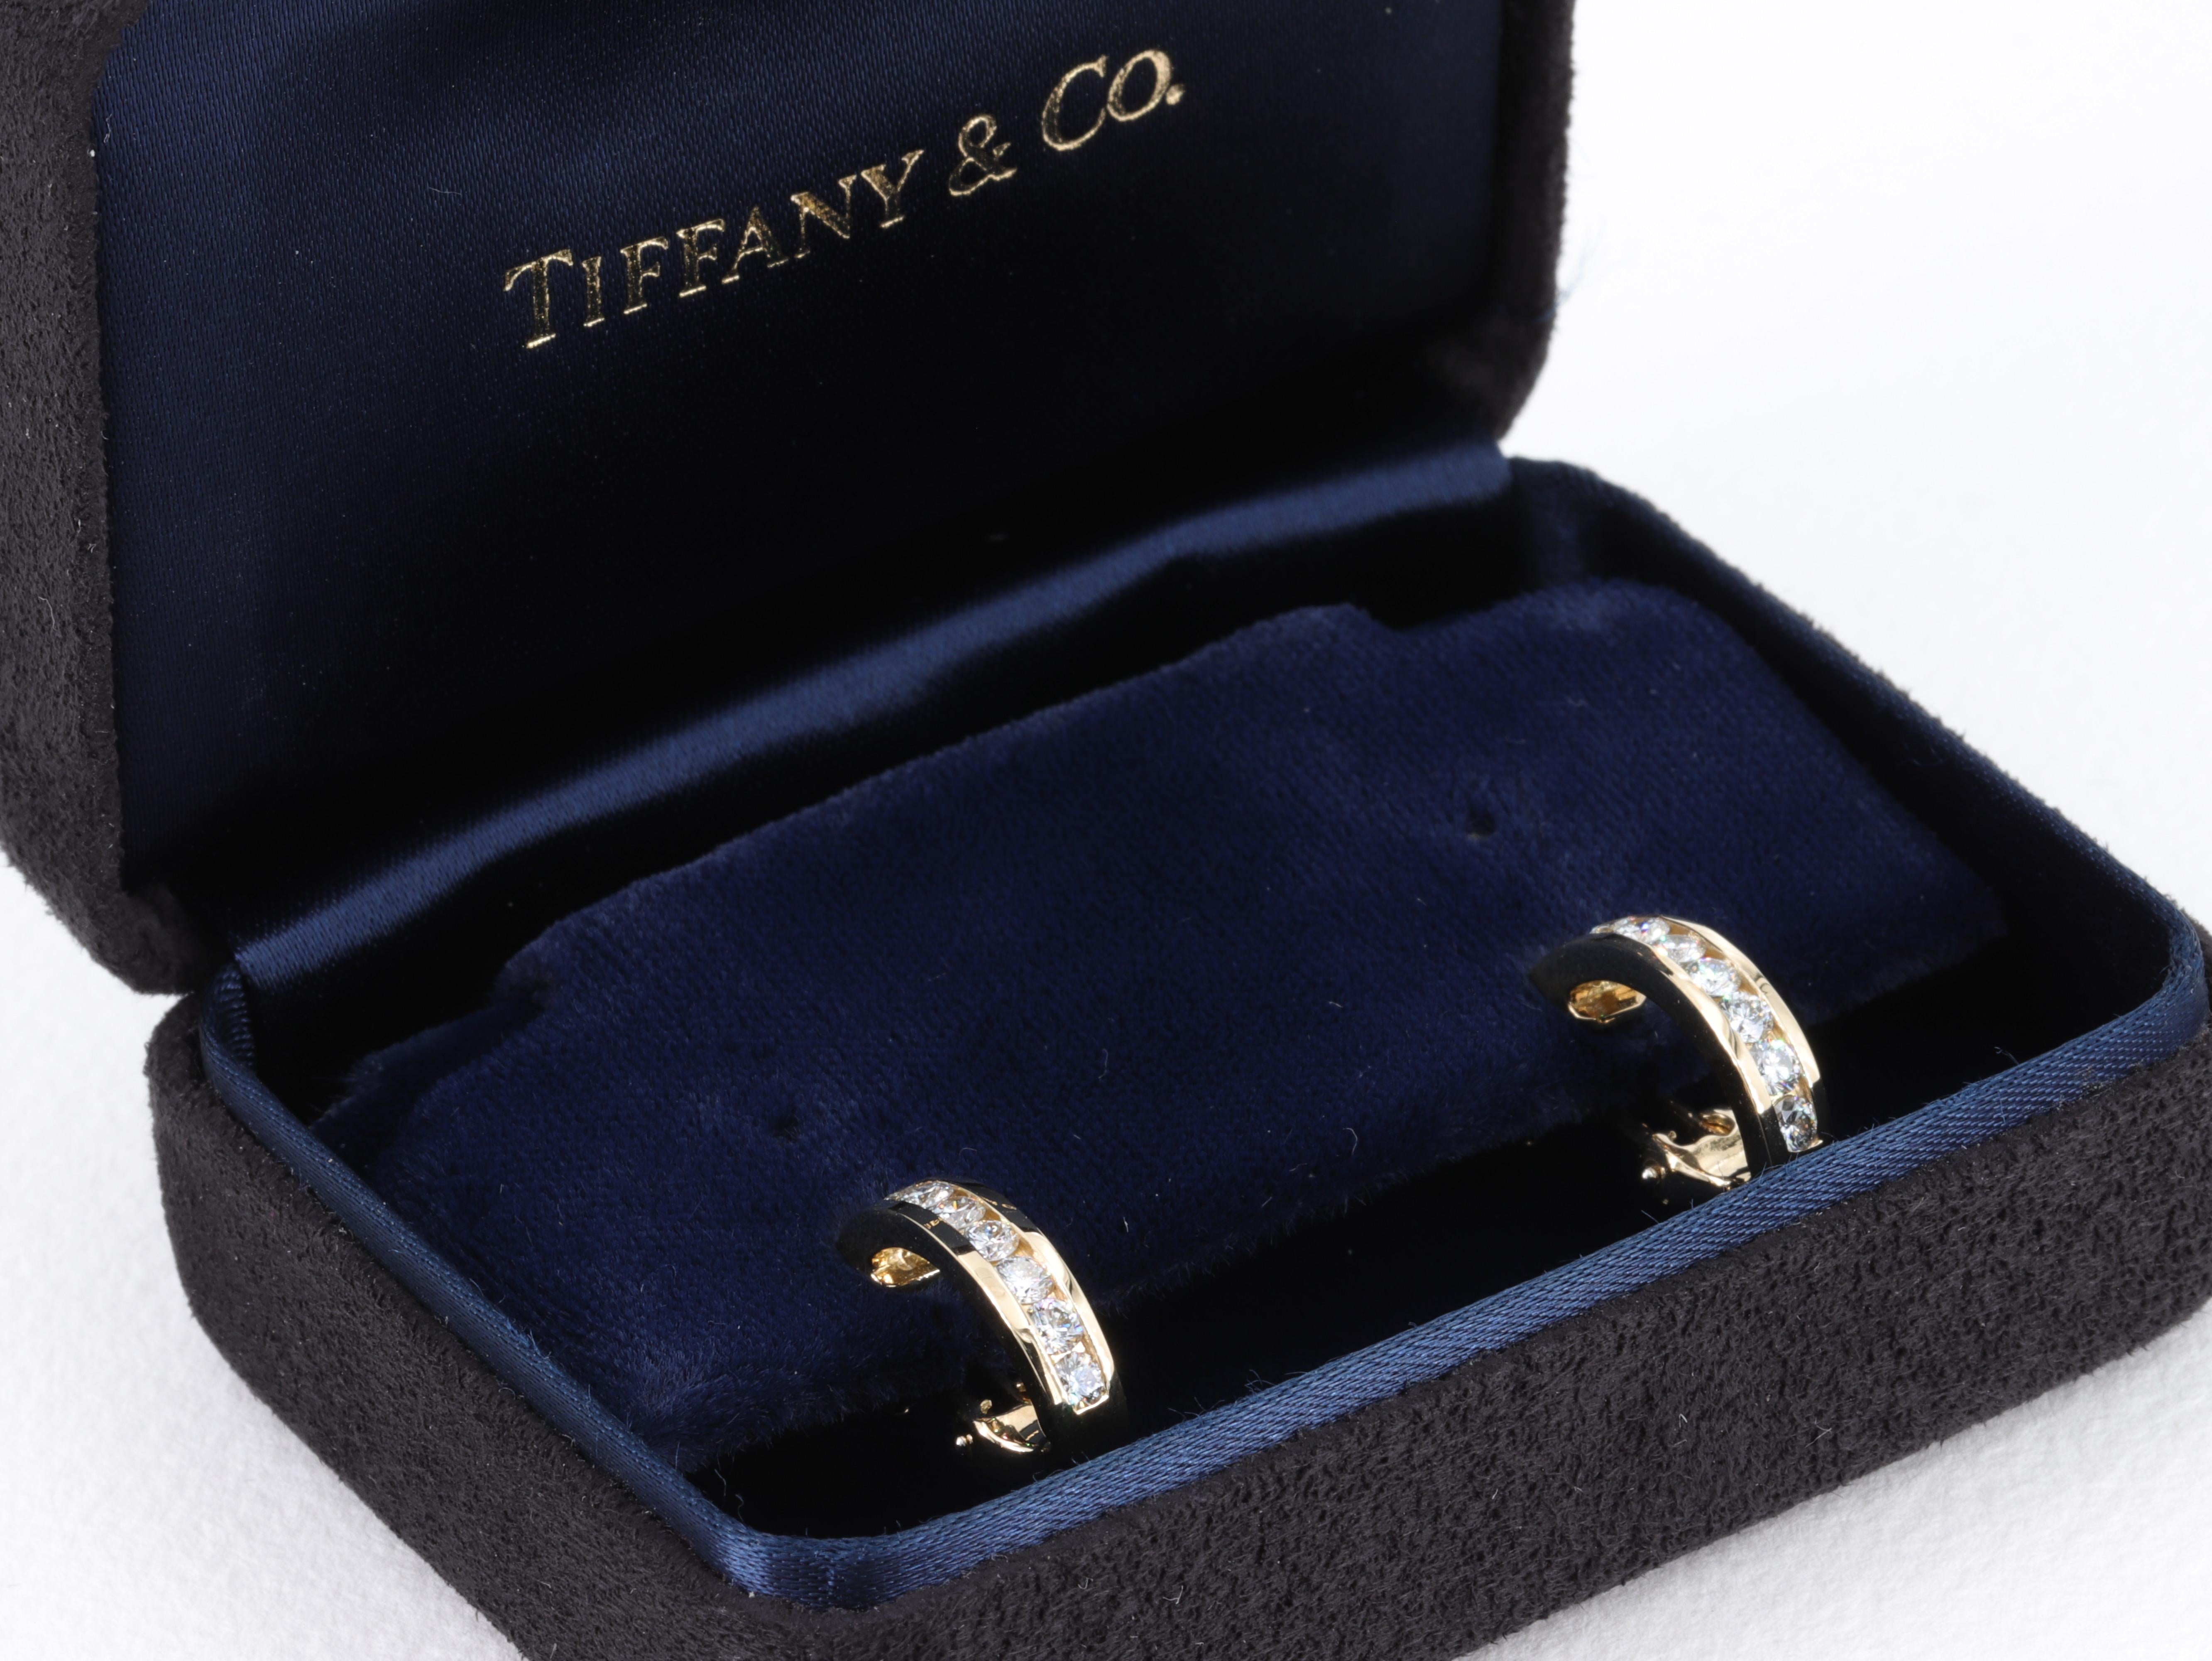 Tiffany & Co. Diamond Huggie Hoop Earrings in 18 Karat Yellow Gold

A great everyday size diamond huggie hoop, set with fine quality round brilliant cut diamonds perfectly channel set in 18 karat yellow gold. 

INCLUDES ORIGINAL INSIDE TIFFANY